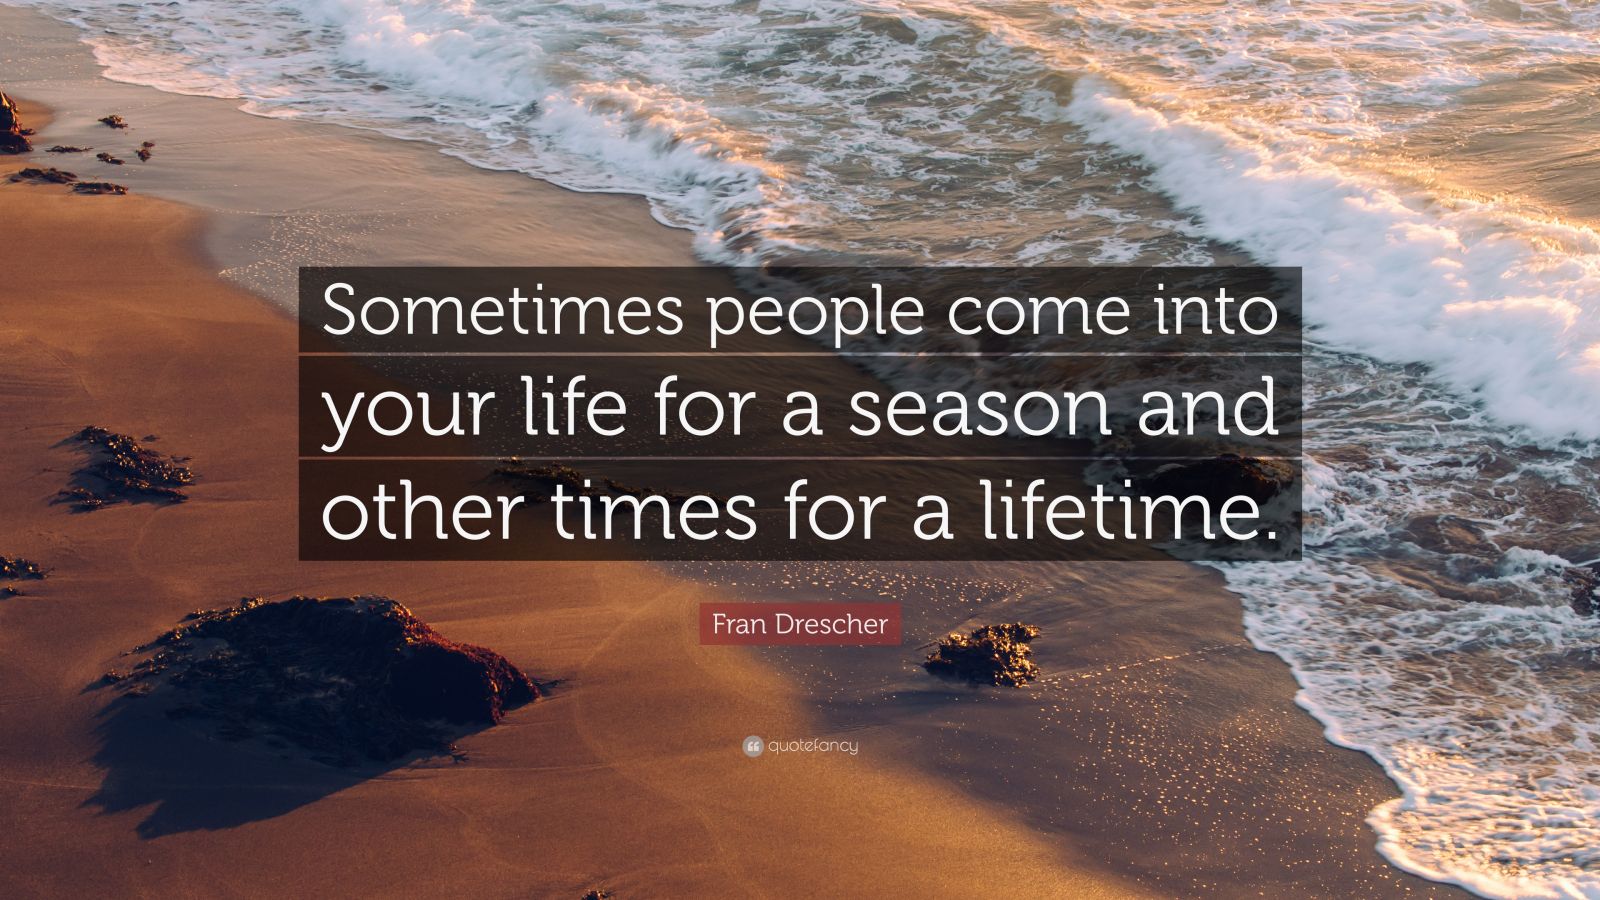 Fran Drescher Quote: “Sometimes people come into your life for a season